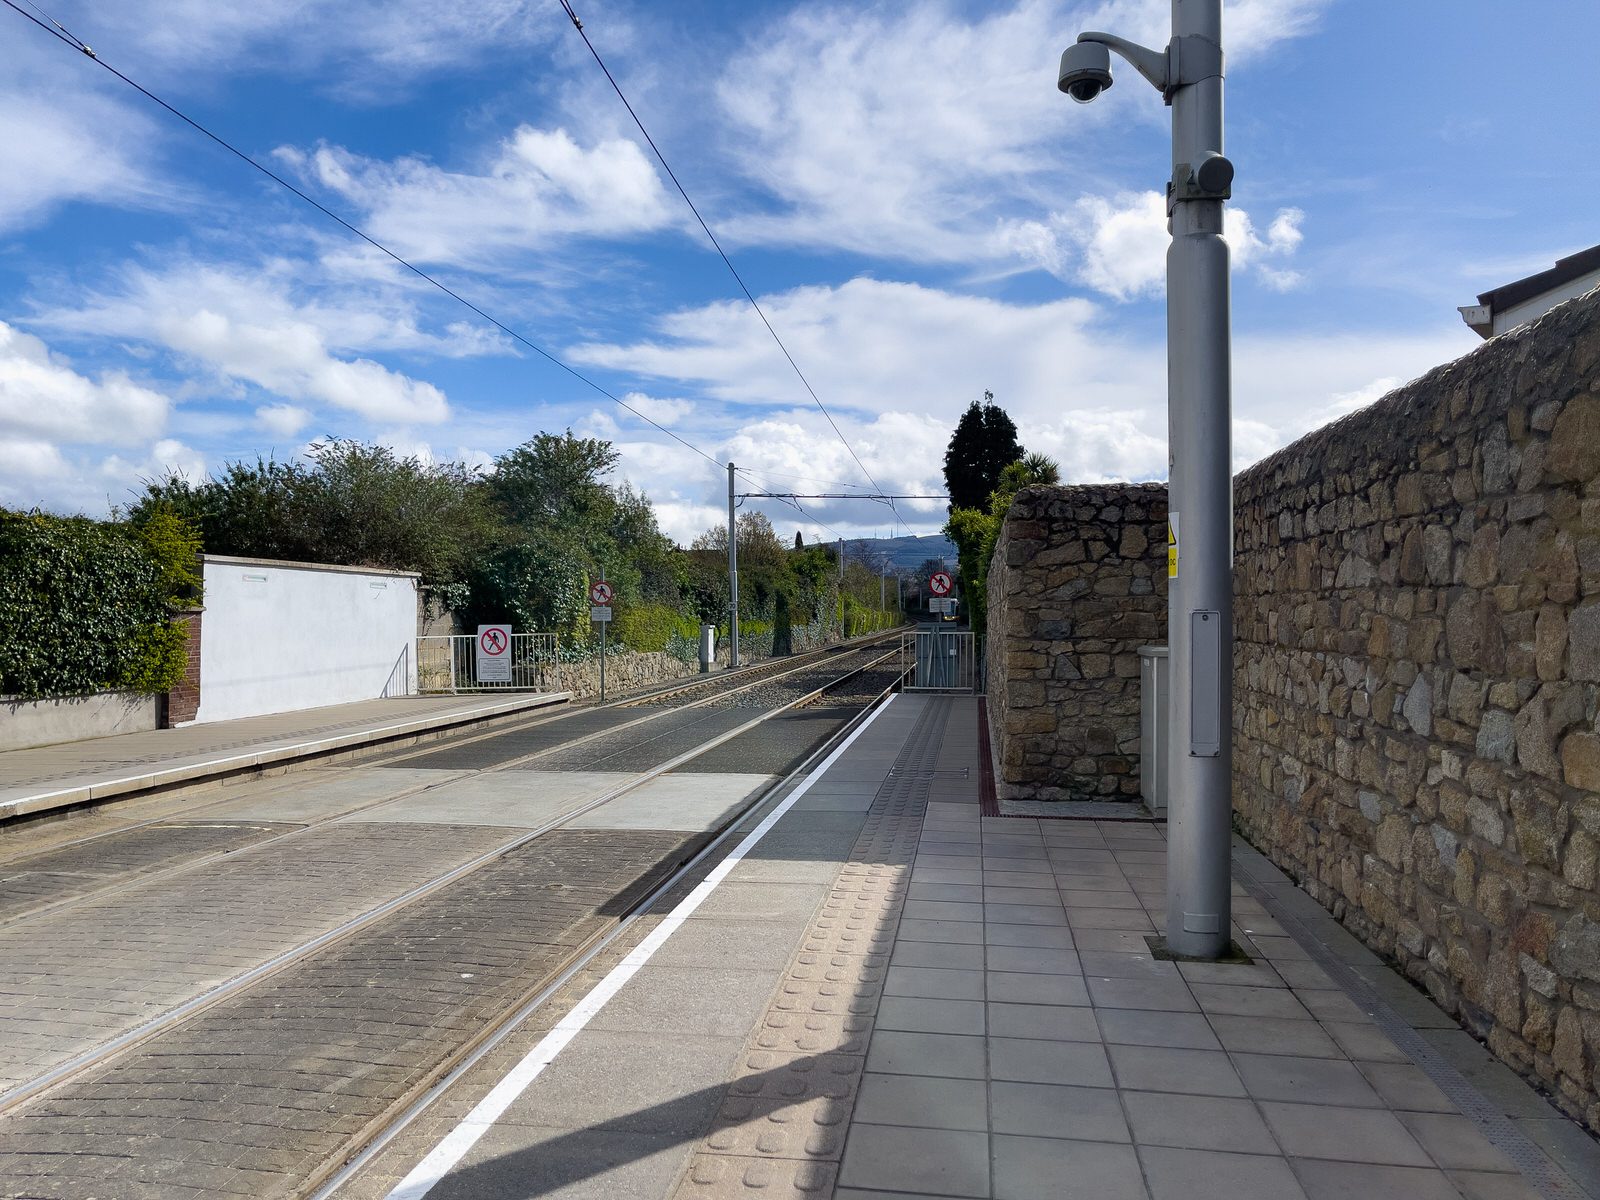 THE LUAS TRAM STOP AT WINDY ARBOUR AND THE IMMEDIATE AREA 037